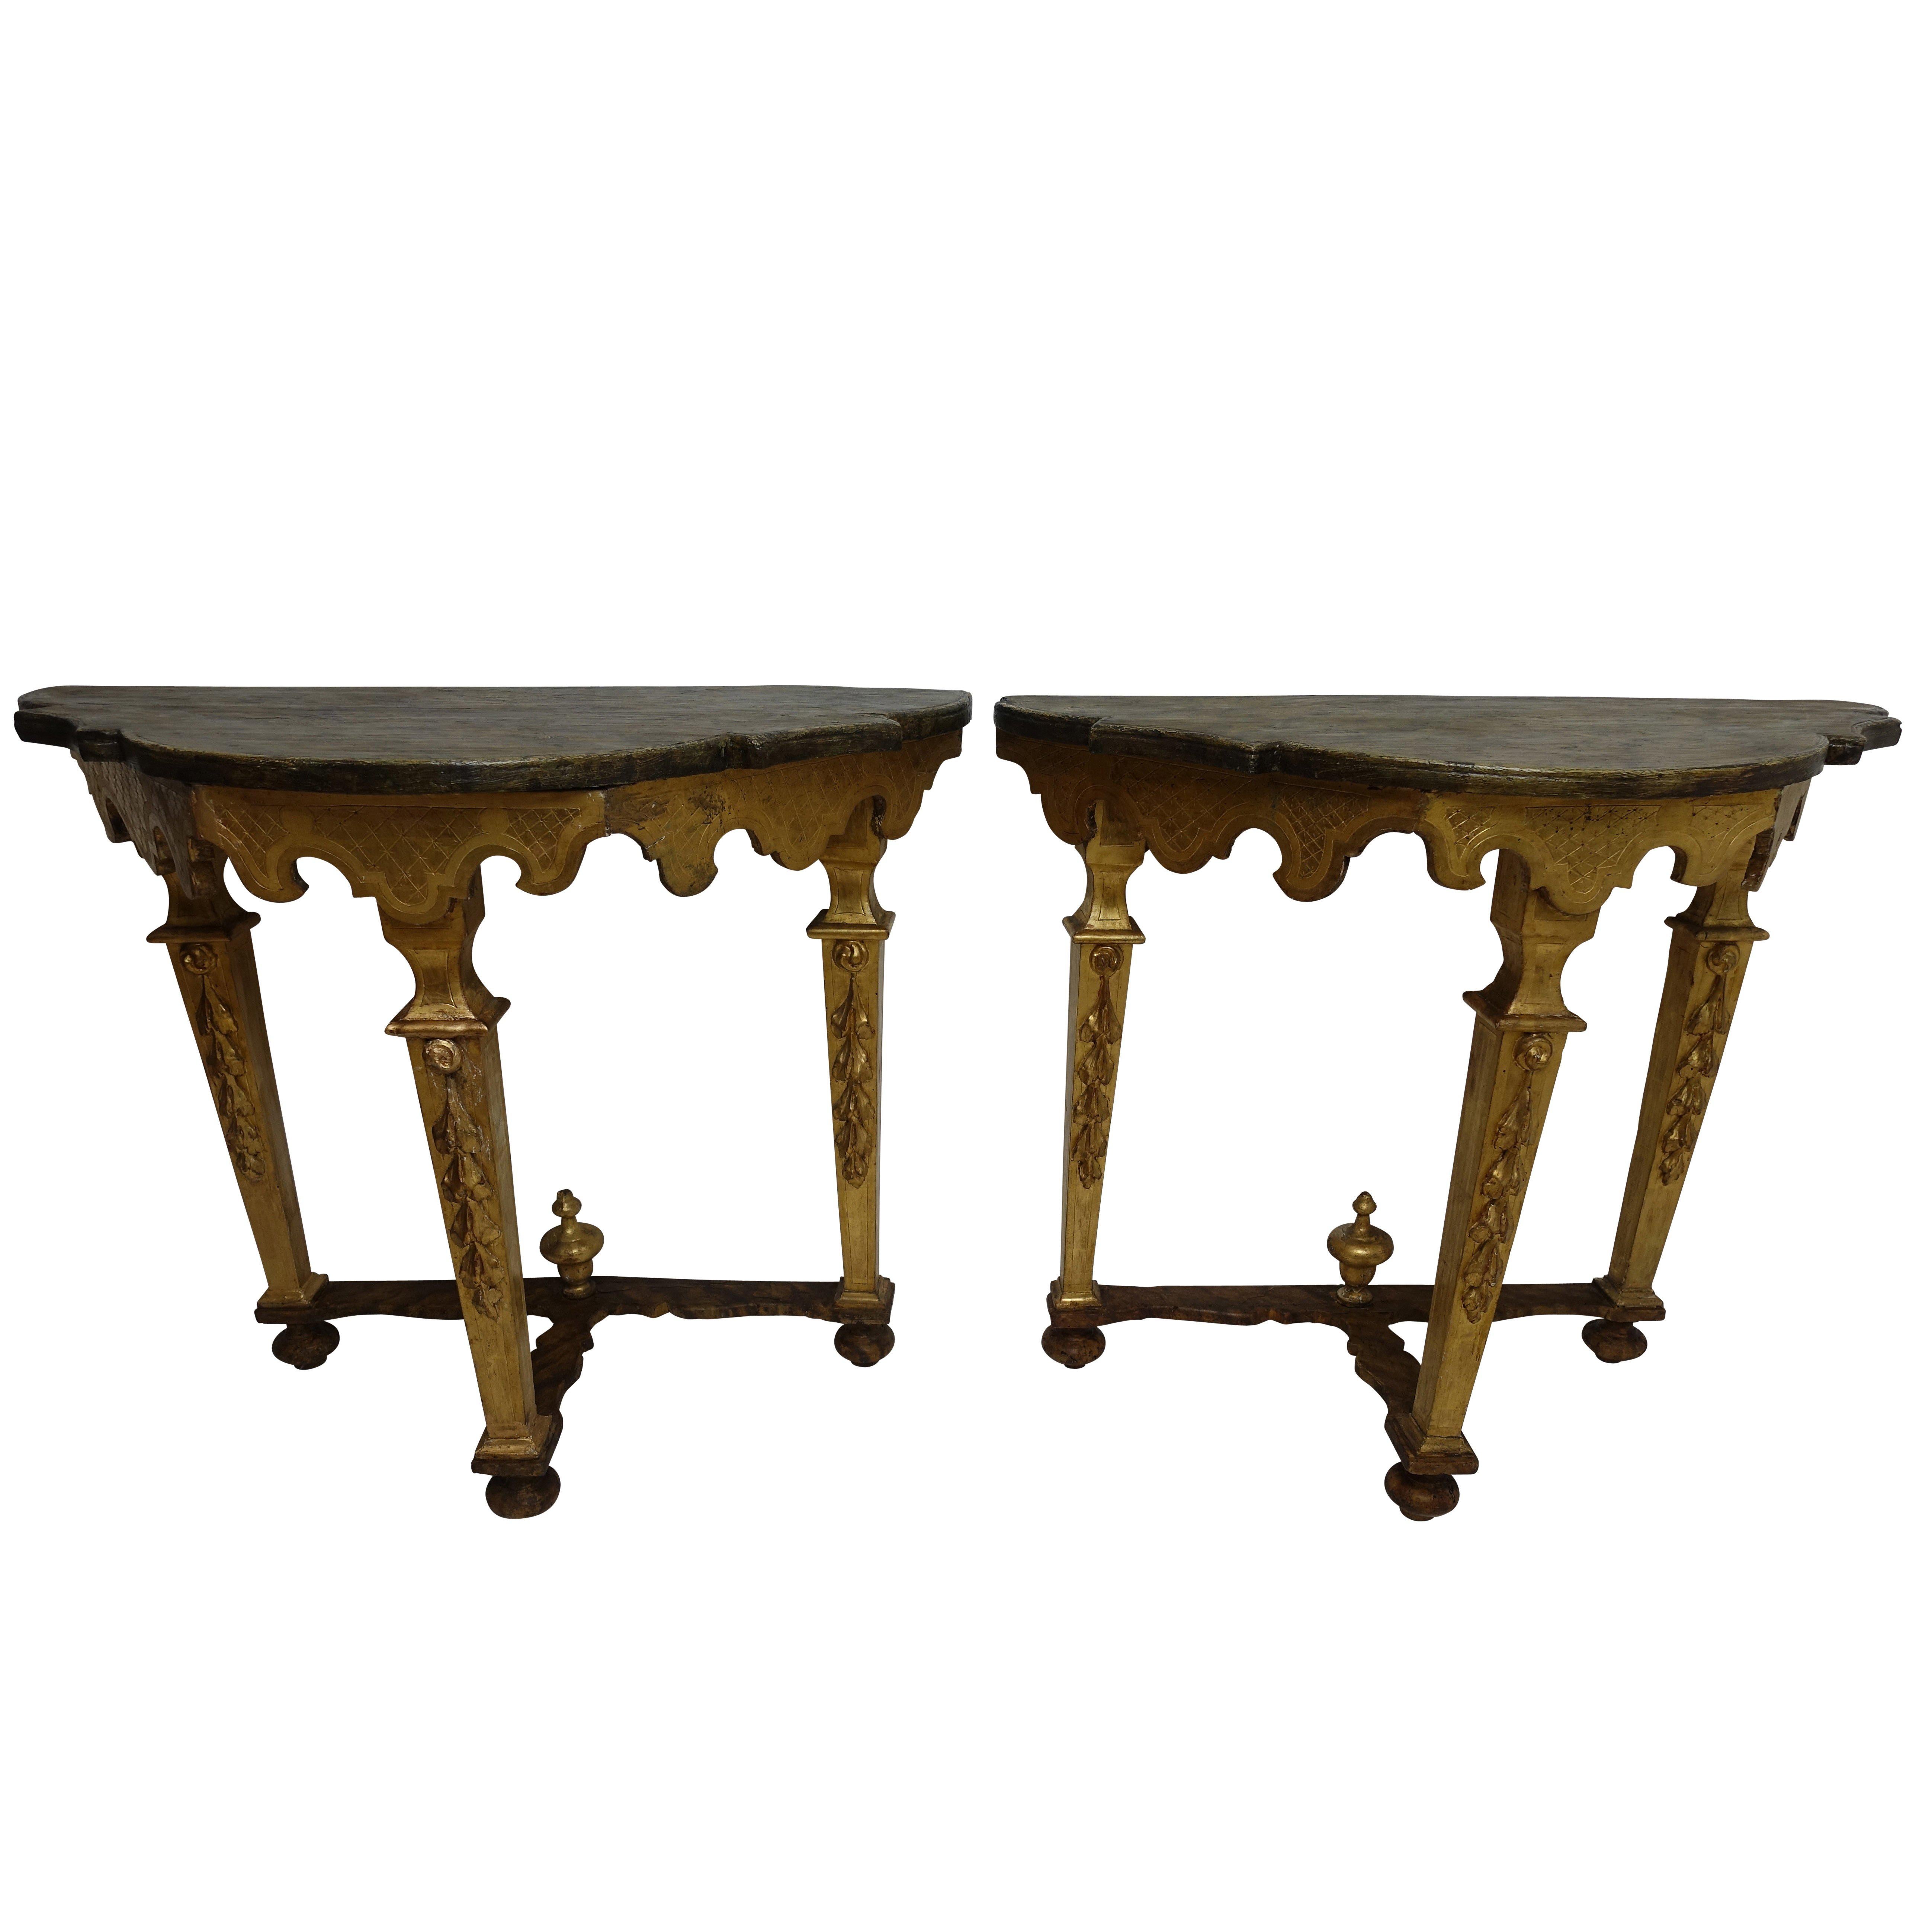 Pair of Florentine Style Carved and Painted Consoles, Italian, 18th Century For Sale